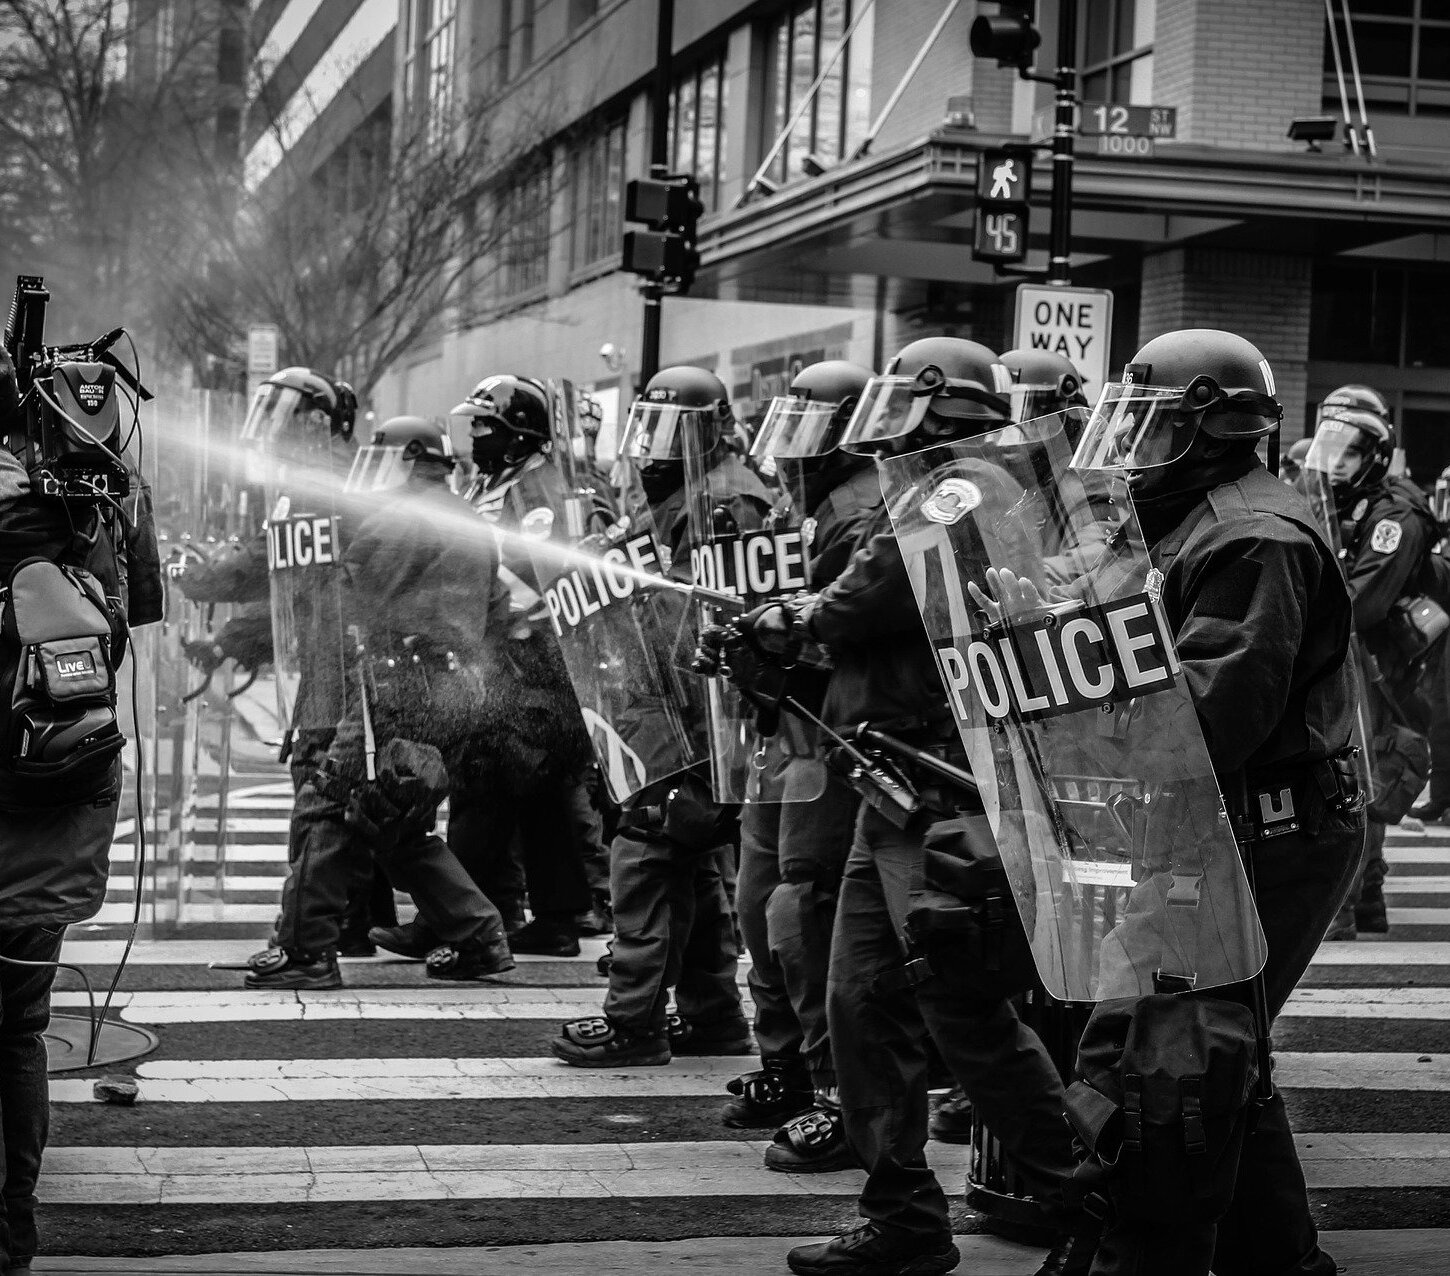 Do the police need to be demilitarized?